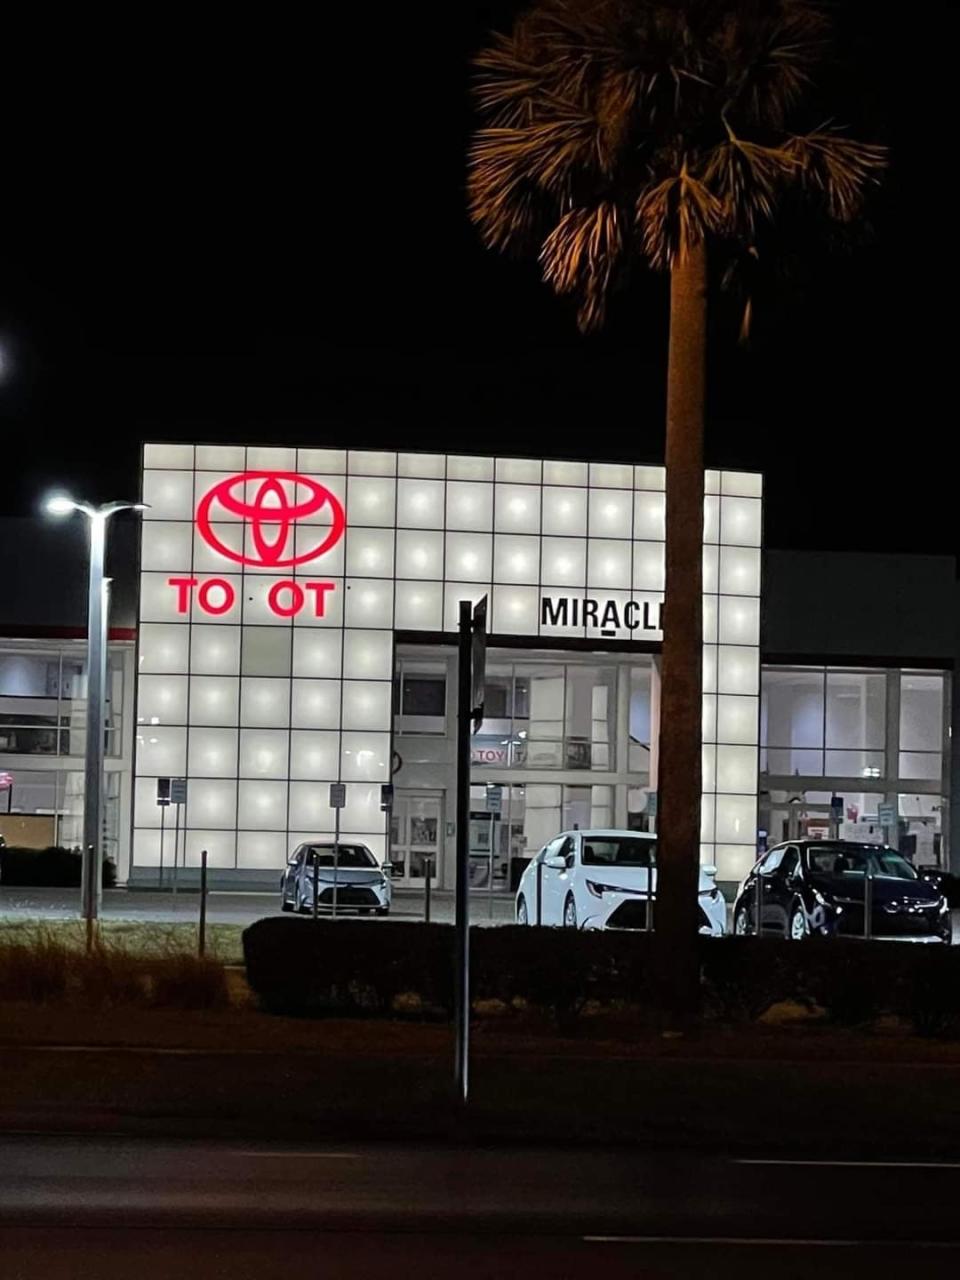 Toyota dealership sign with burnt out letters that spell "Toot"